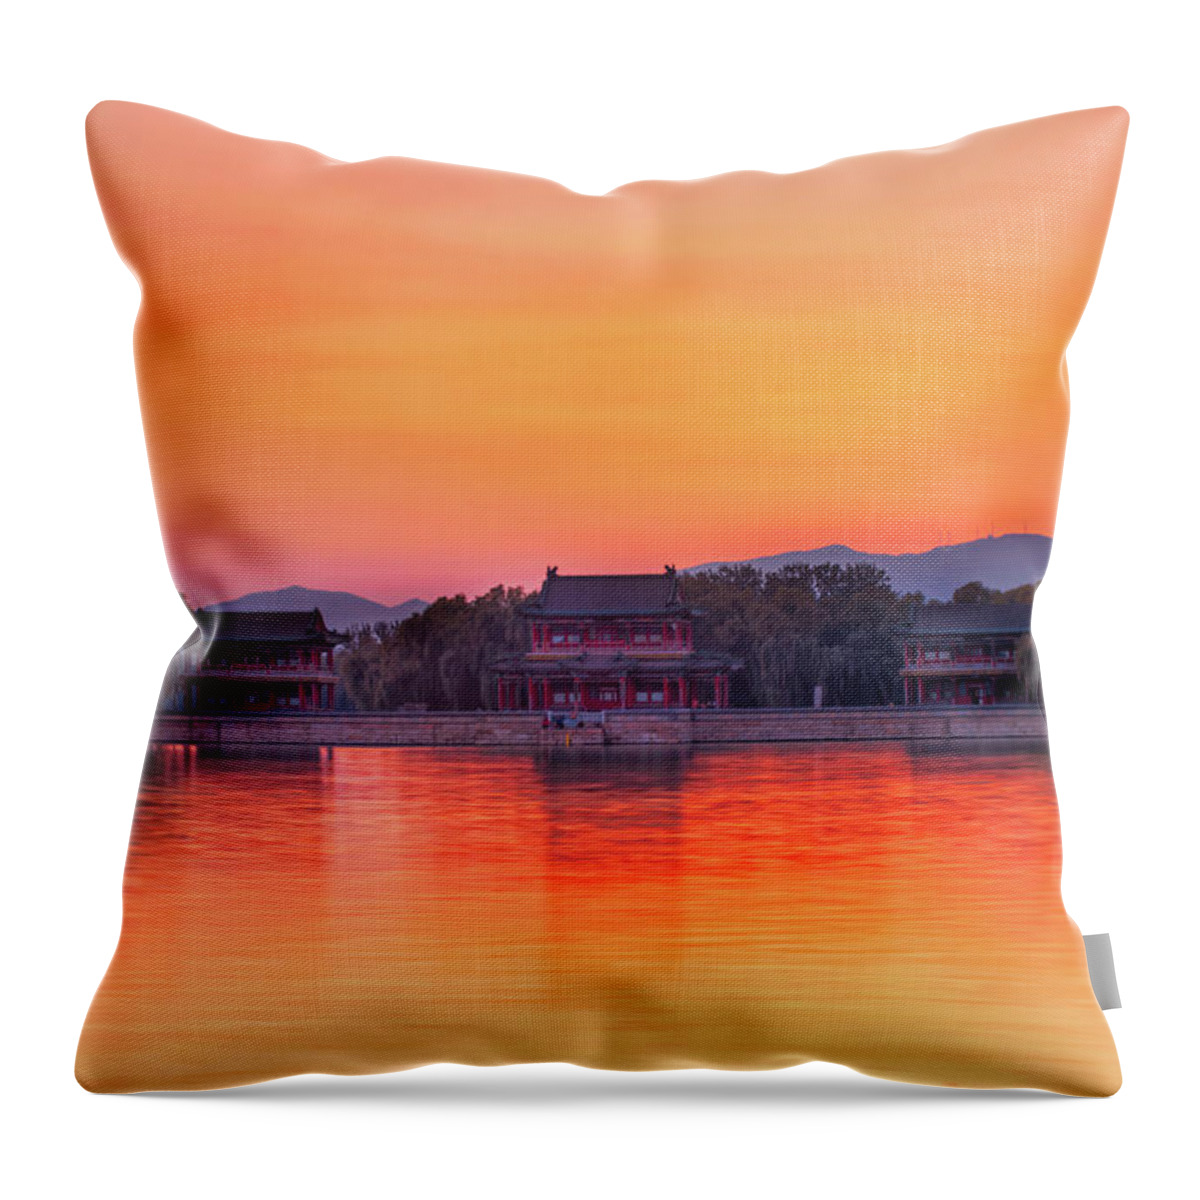 Tranquility Throw Pillow featuring the photograph The West Bank Of The Summer Palace by Czqs2000 / Sts